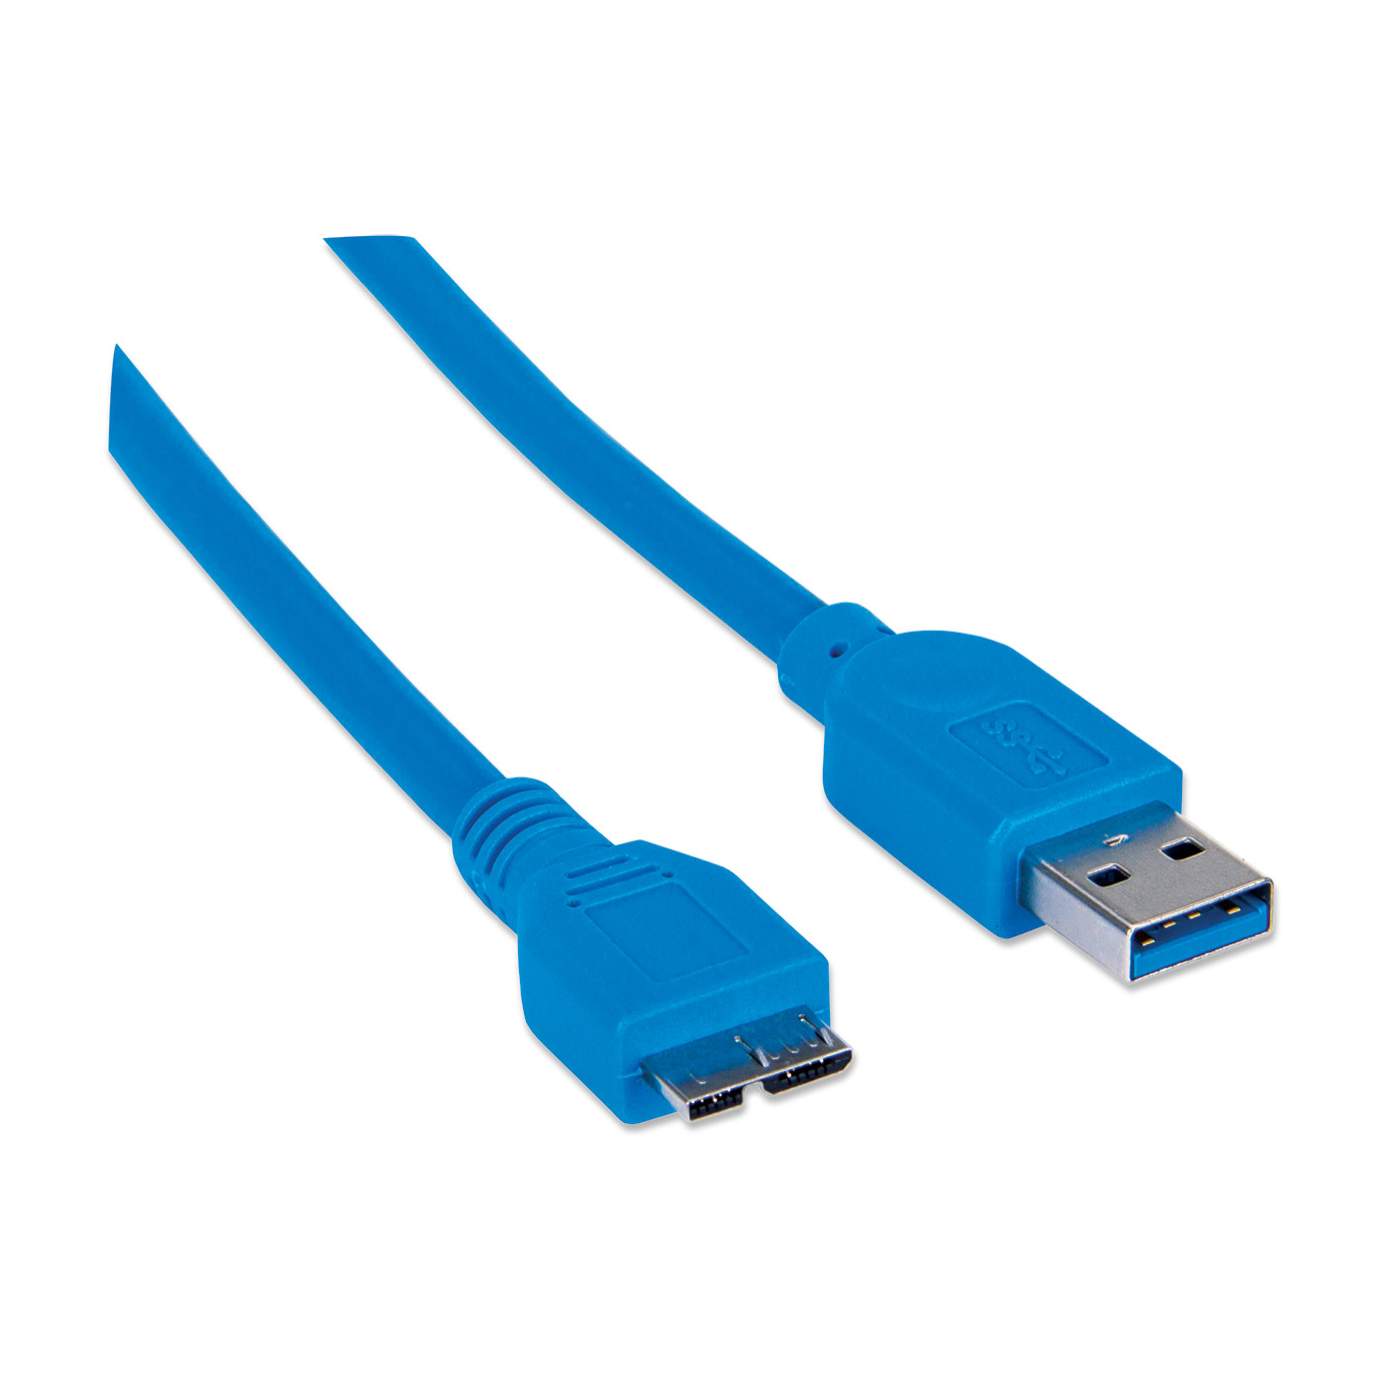 USB 3.0 Type-A to Micro-USB Cable Image 3